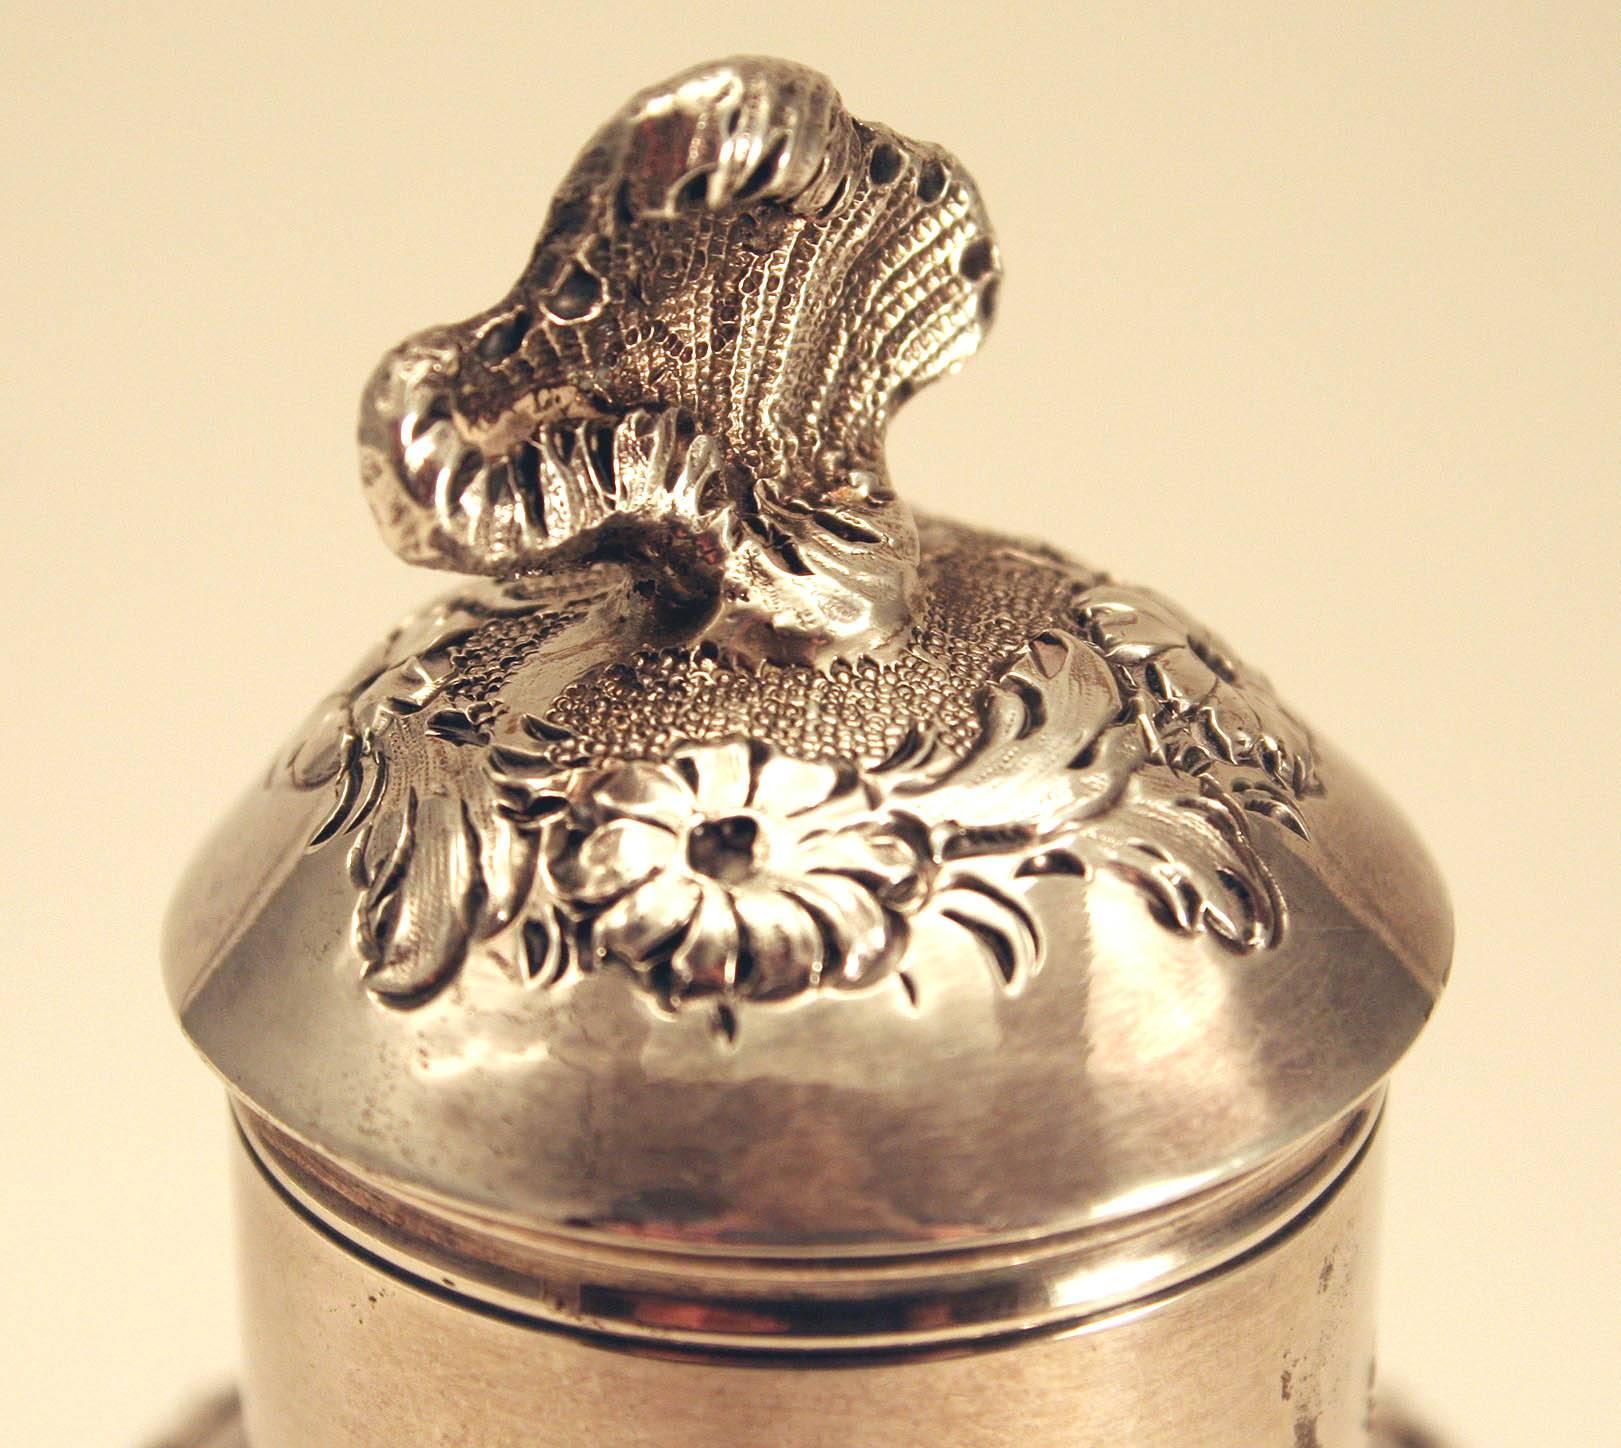 Fine George II Silver Tea Caddy, by Samuel Taylor, having a reverse pear-form body embossed with floral garlands centering a blank cartouche on each side, removable lid with shell-form finial. Marked on underside of base.

Samuel was the son of